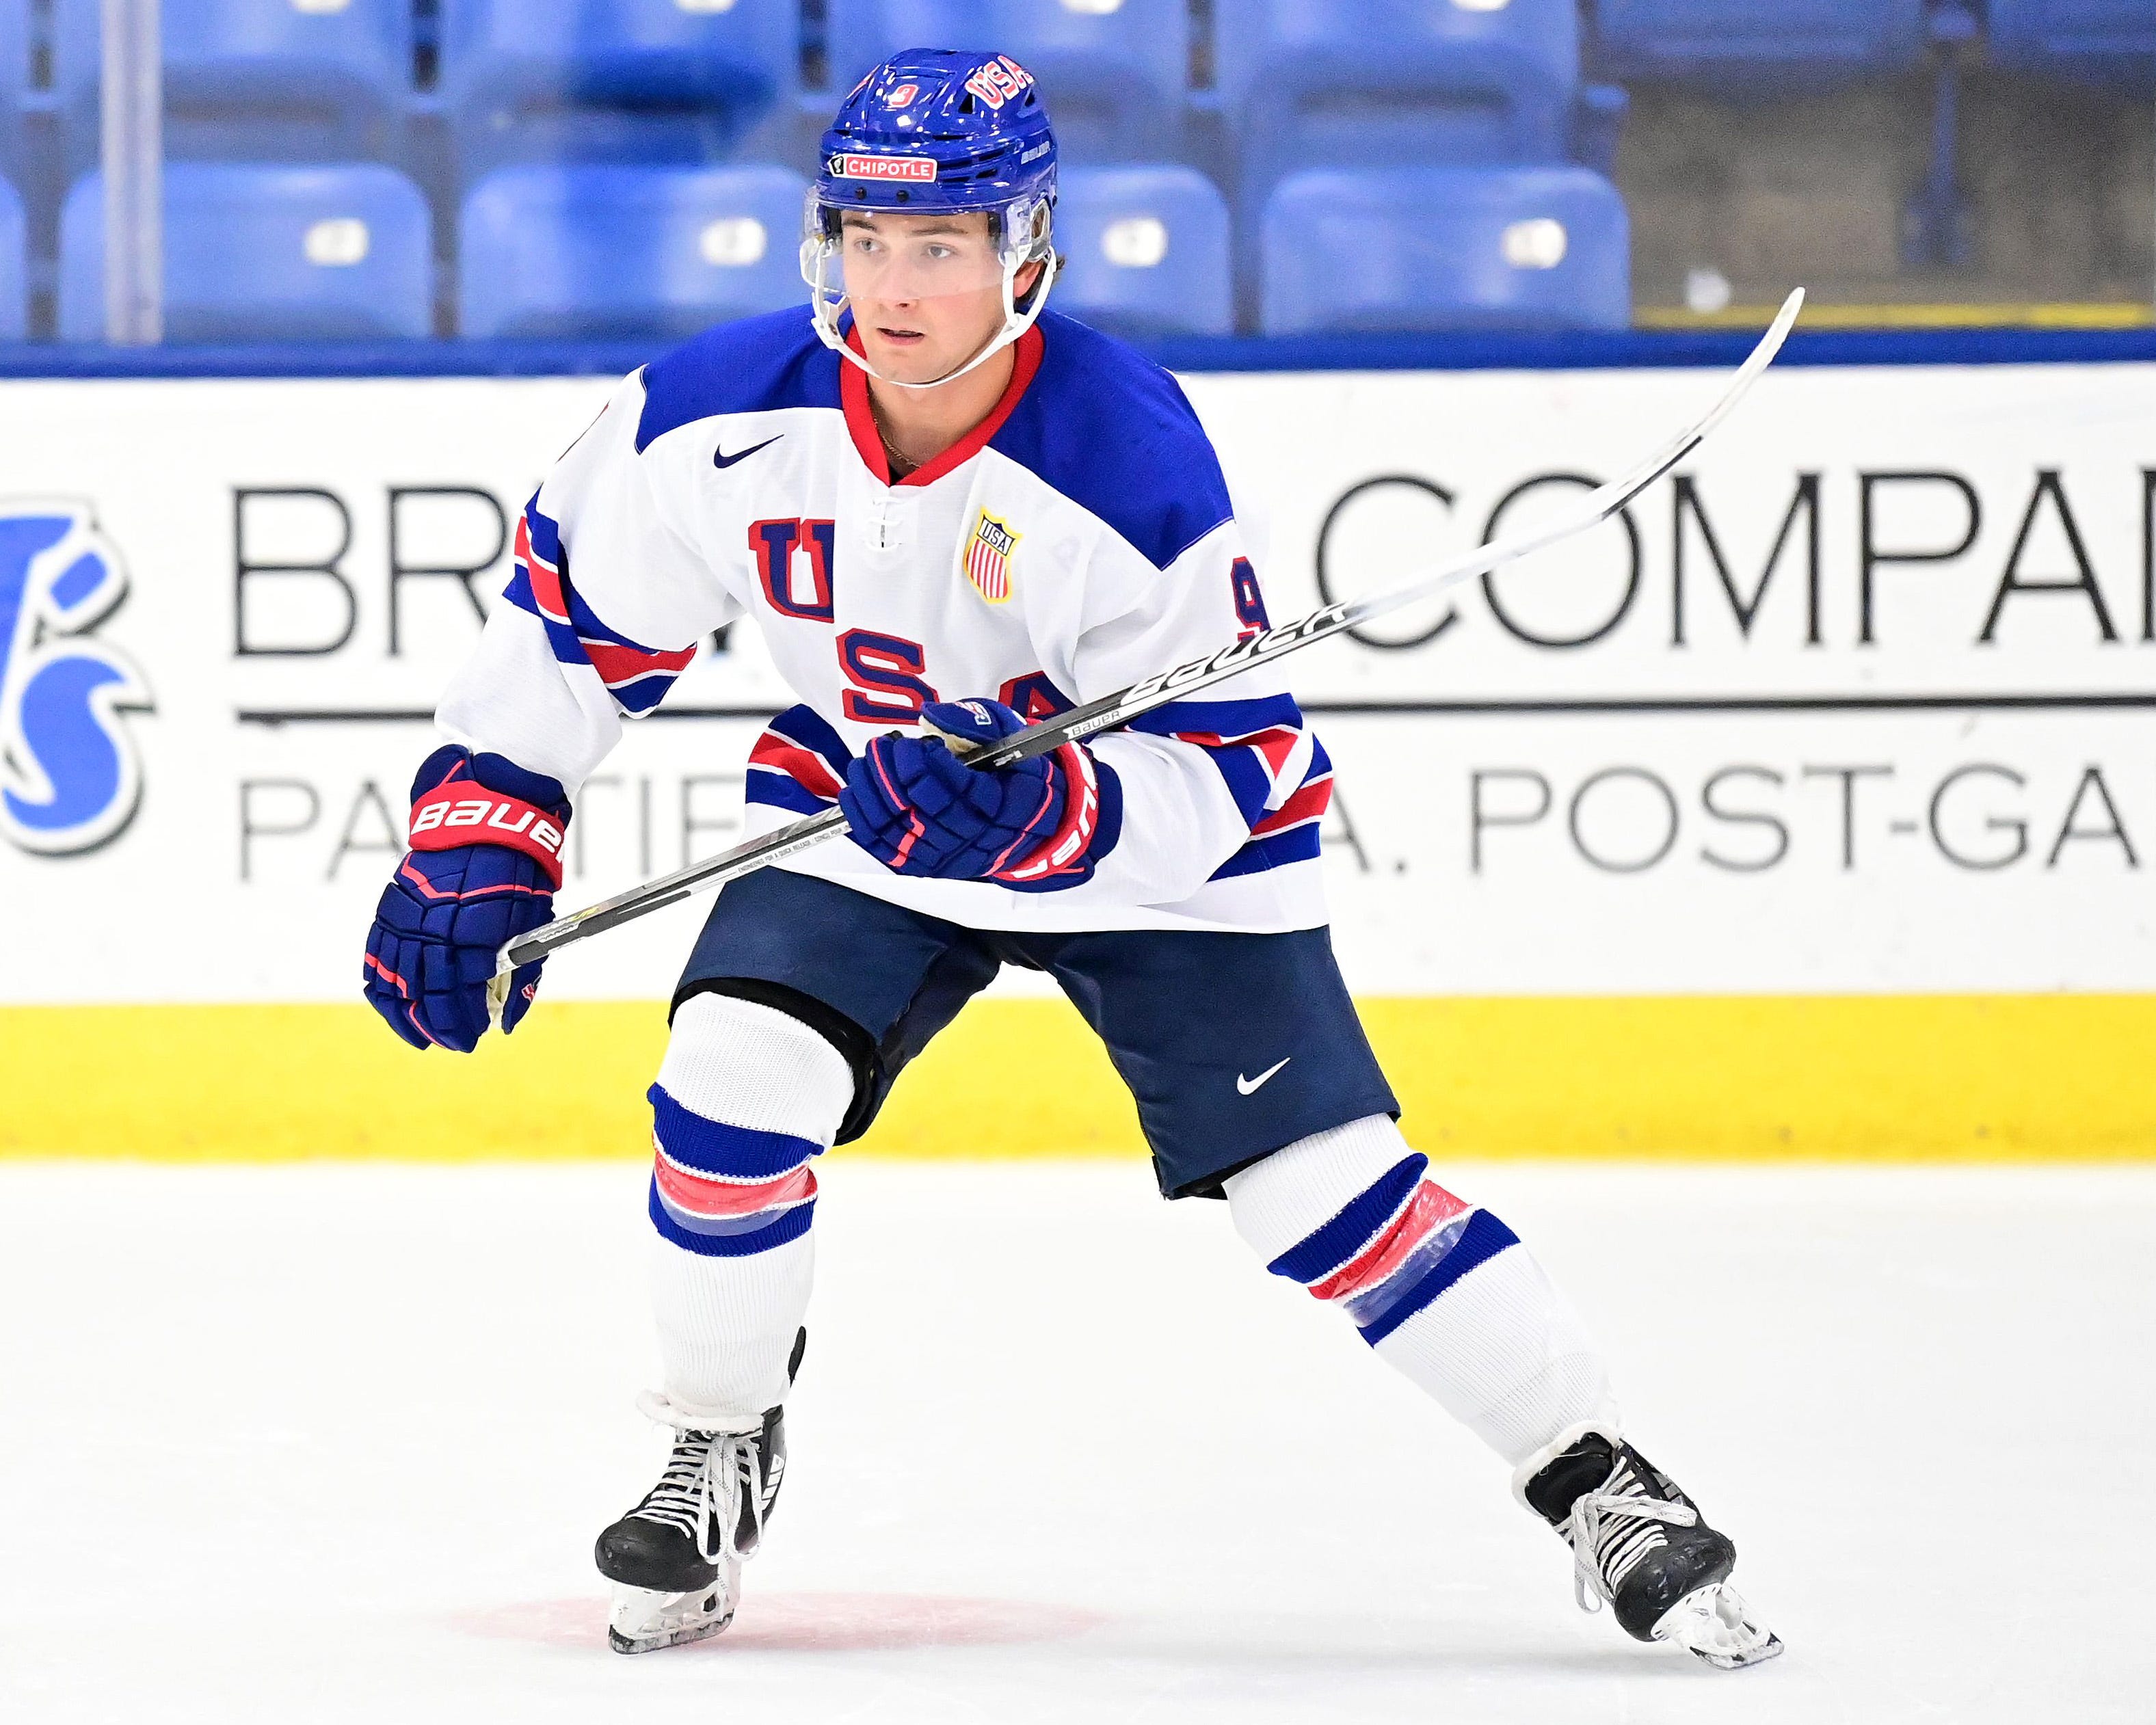 Prospect Ryan Ufko Continues Growth After Impactful World Juniors Play